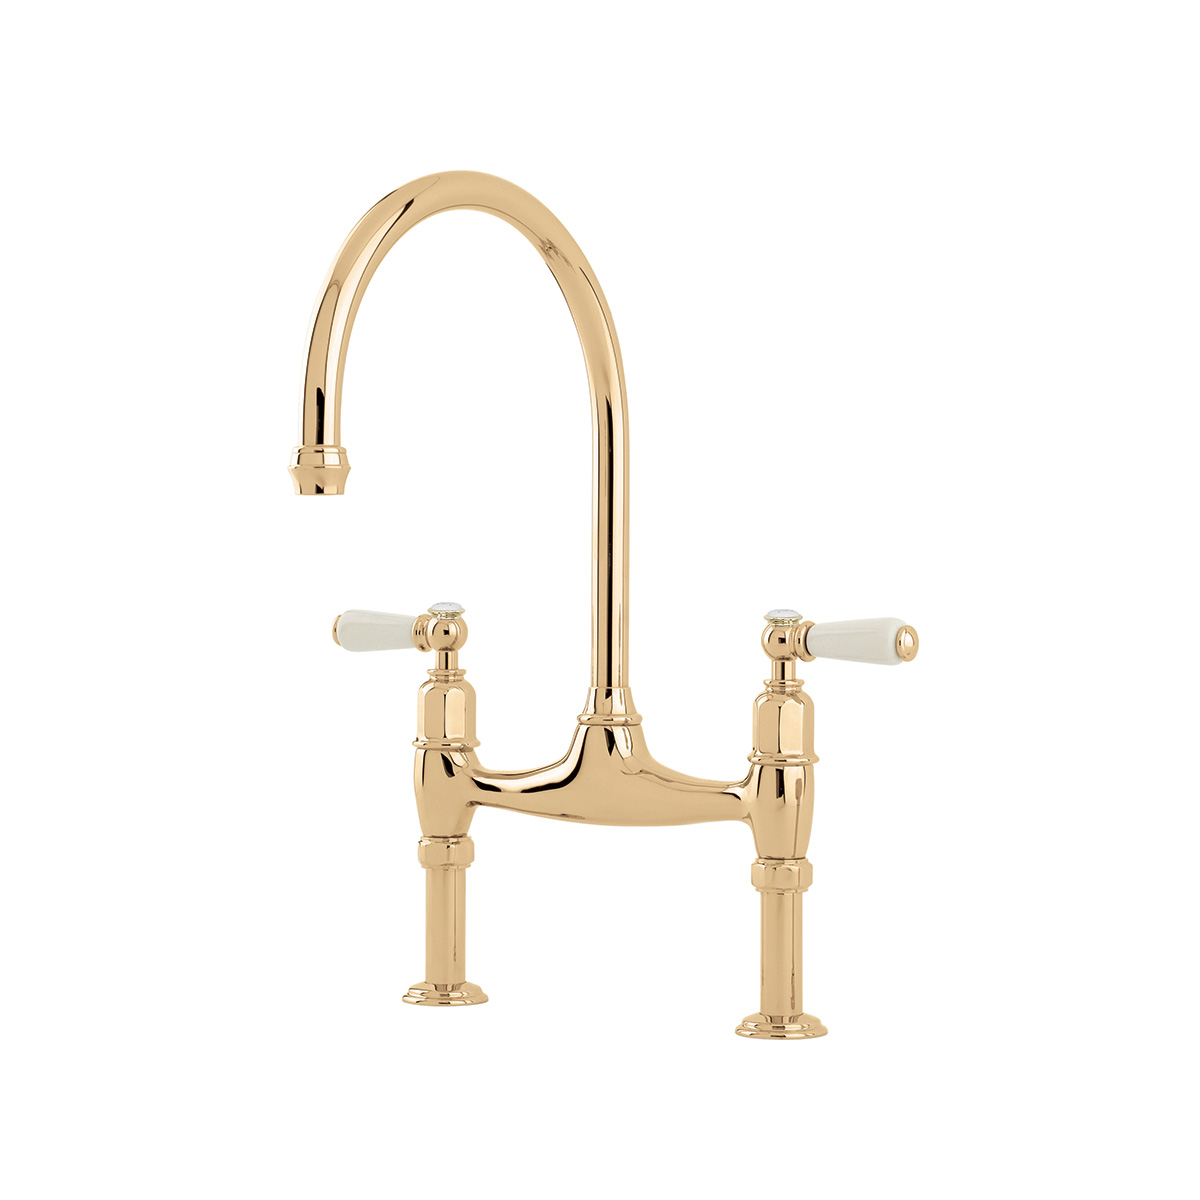 Shaws by Perrin & Rowe Pendleton bridge mixer in polished brass. Ionian style kitchen tap with straight unions AUSH.4193. Distributed in Australia by Luxe by Design, Brisbane.